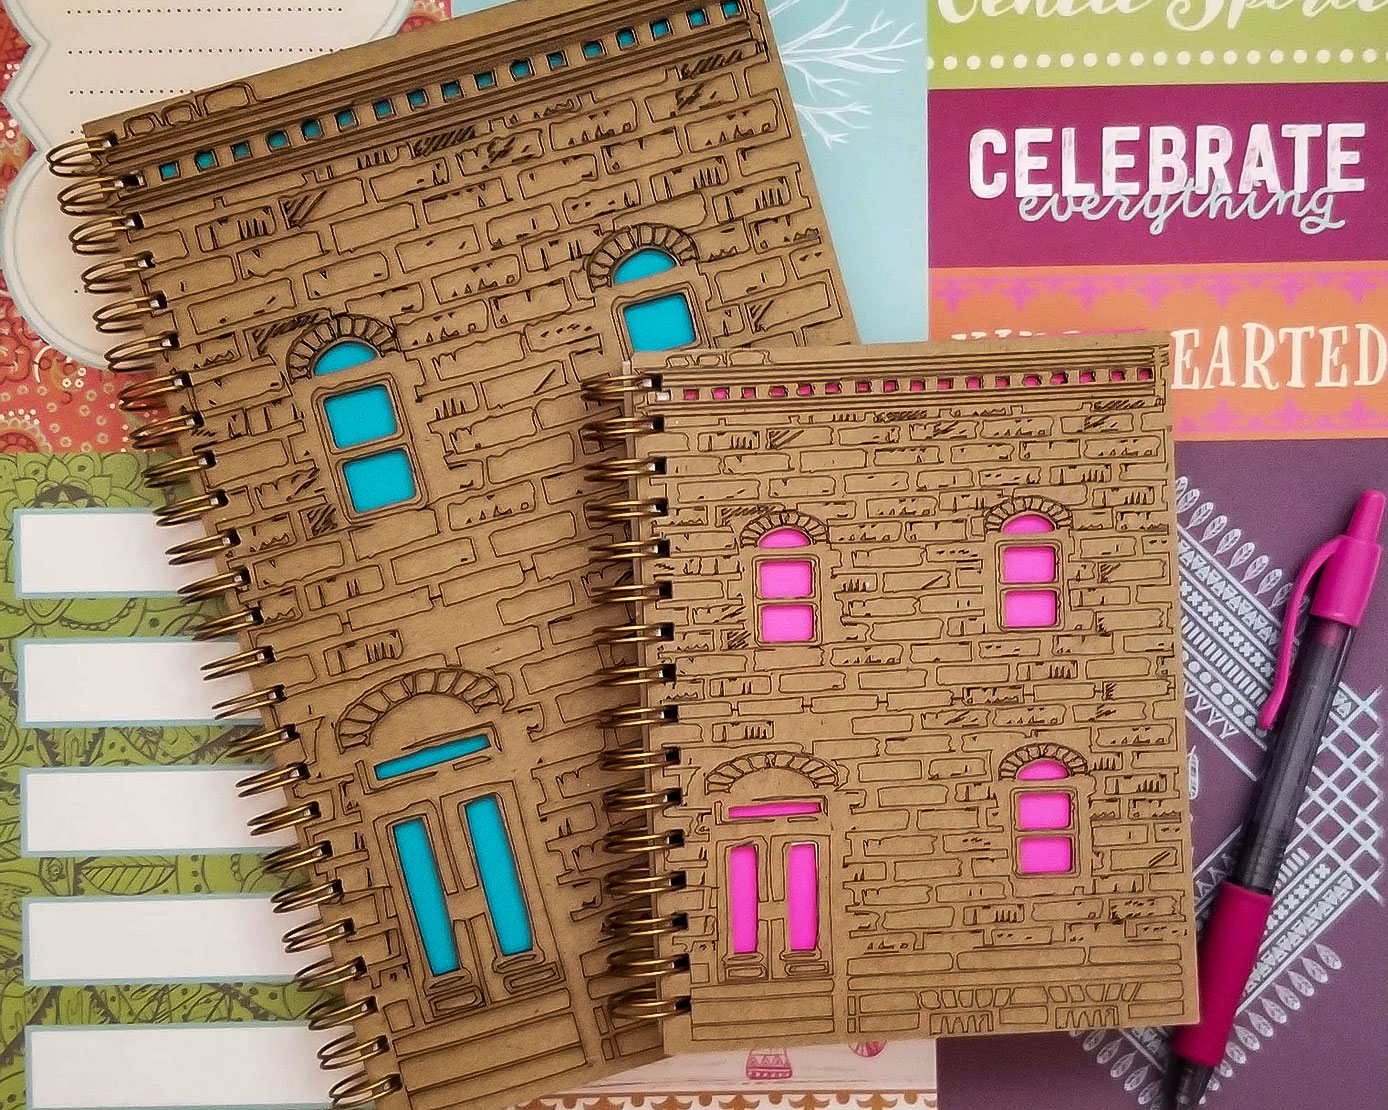 Notebooks with covers that look like Baltimore rowhomes by Drama MaMa Bookshop.